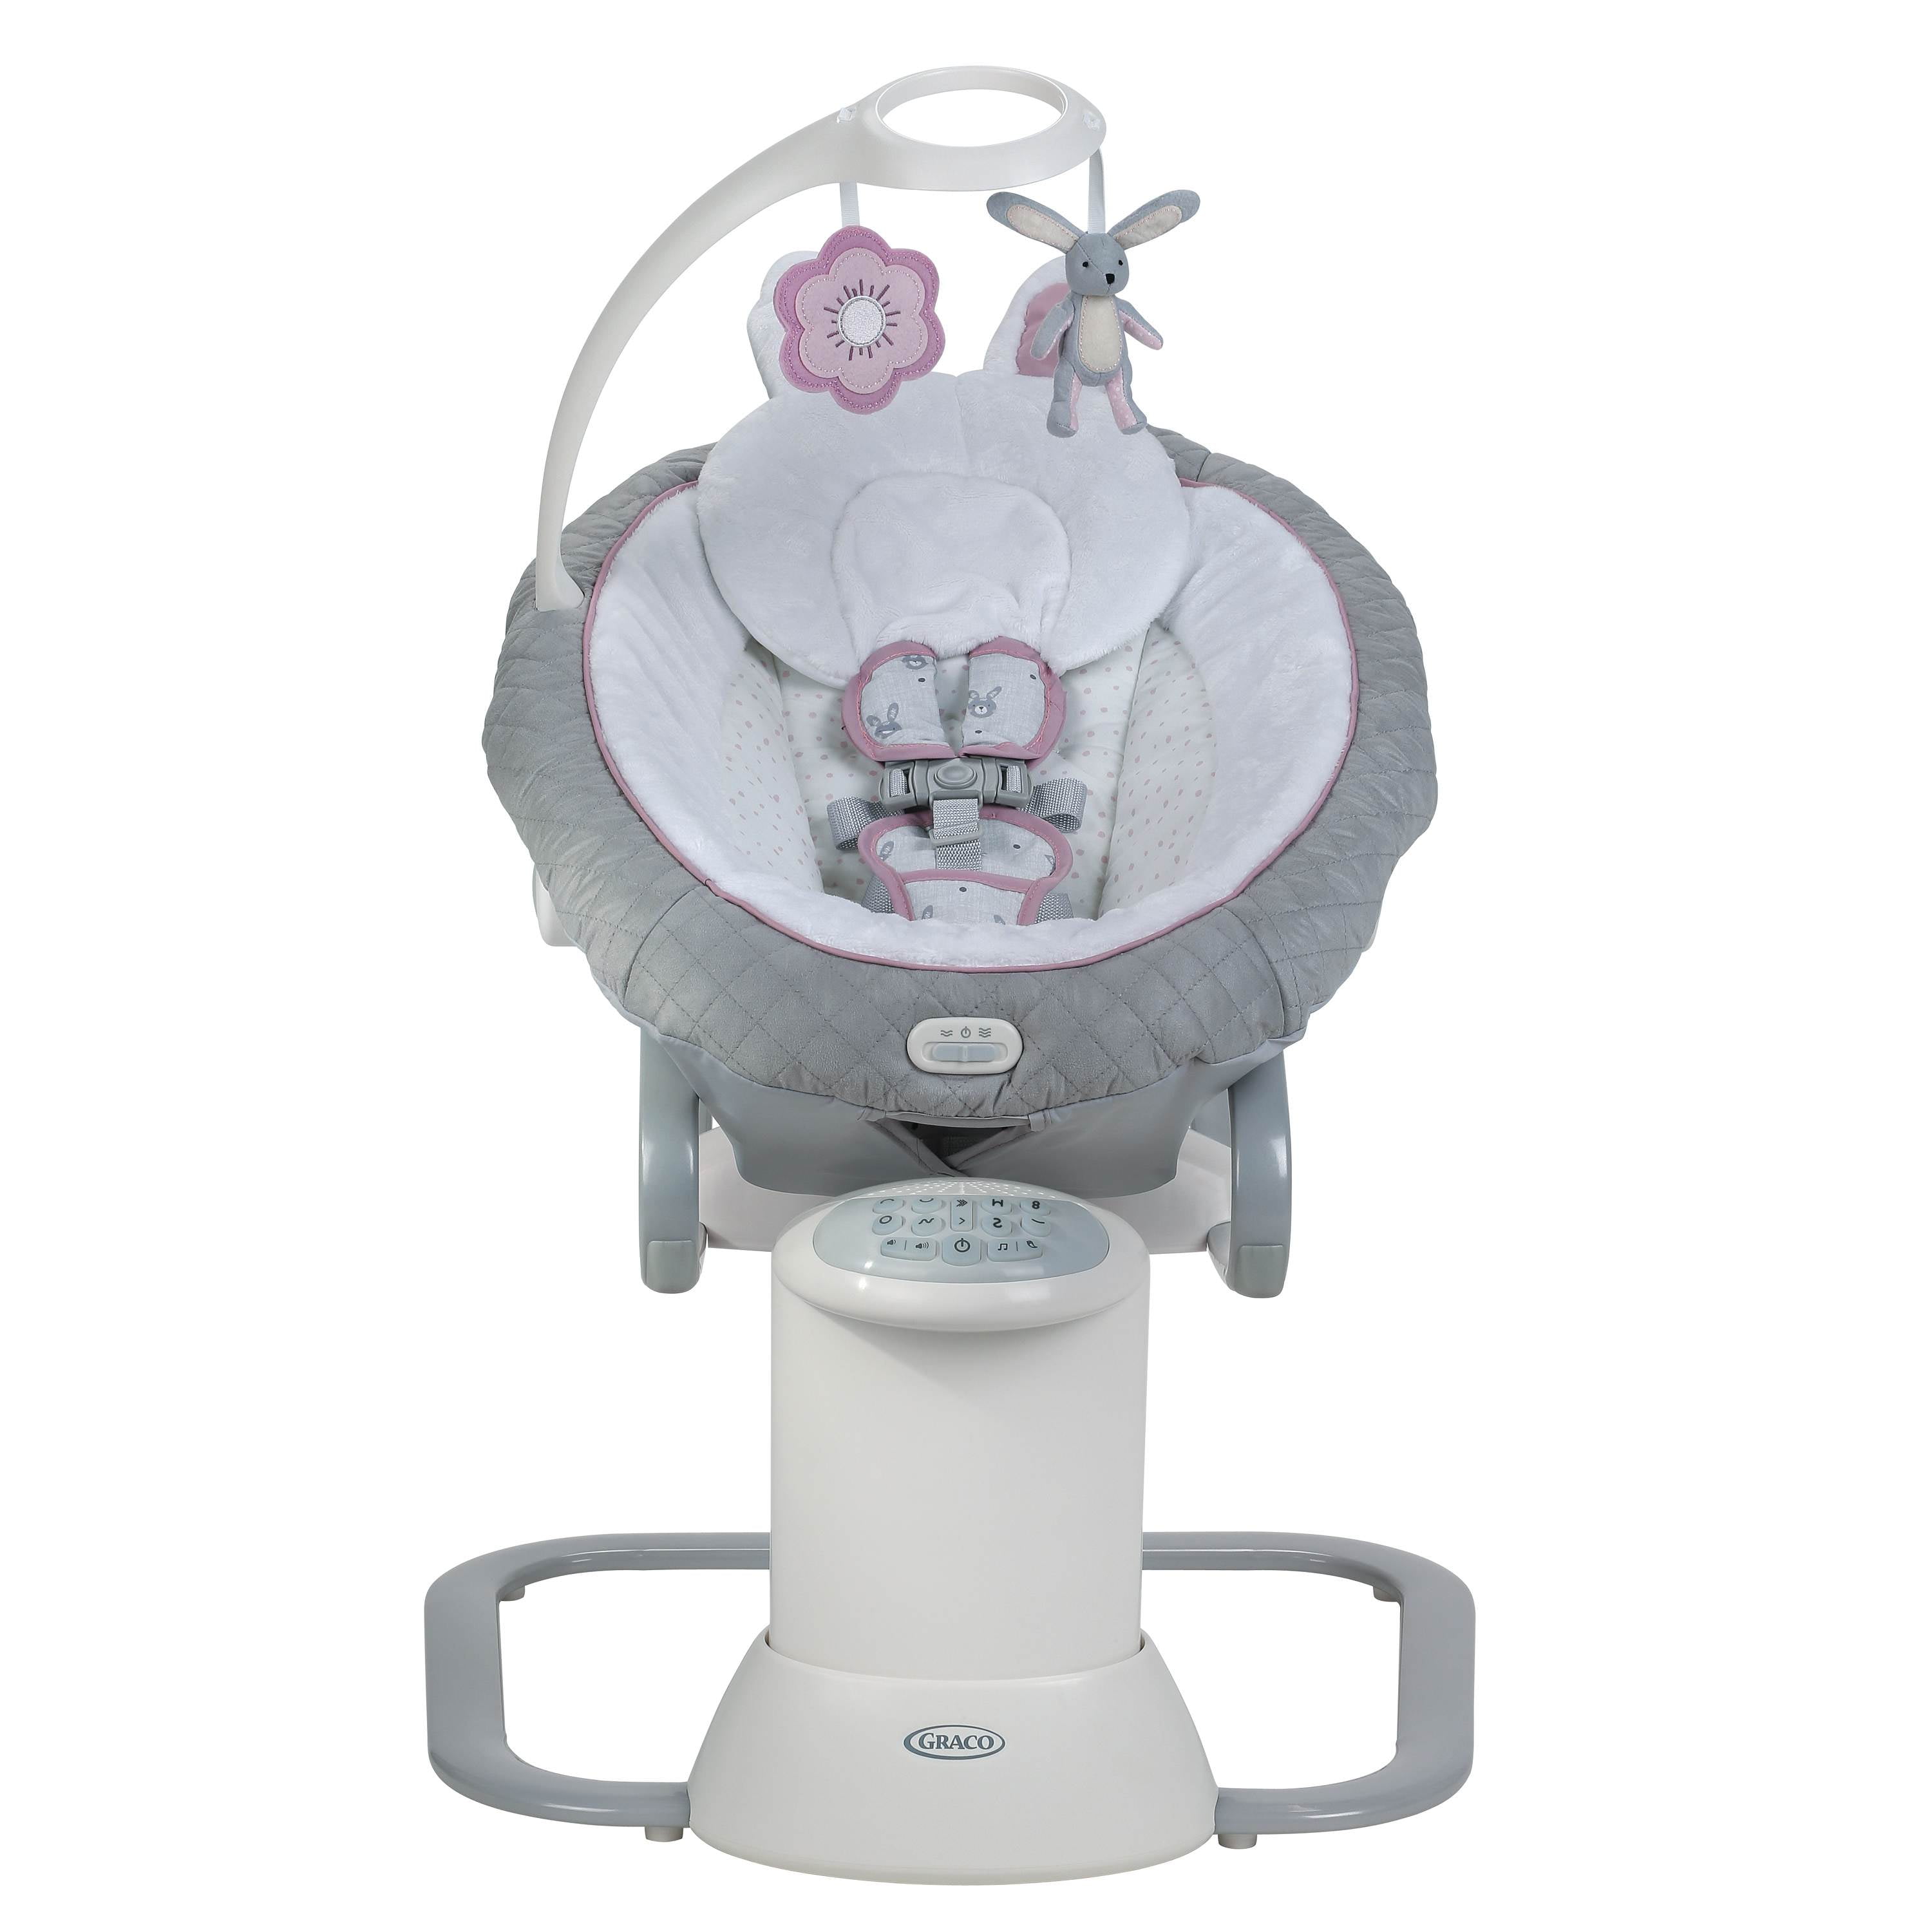 Graco EveryWay Soother Baby Swing with Removable Rocker, Josephine